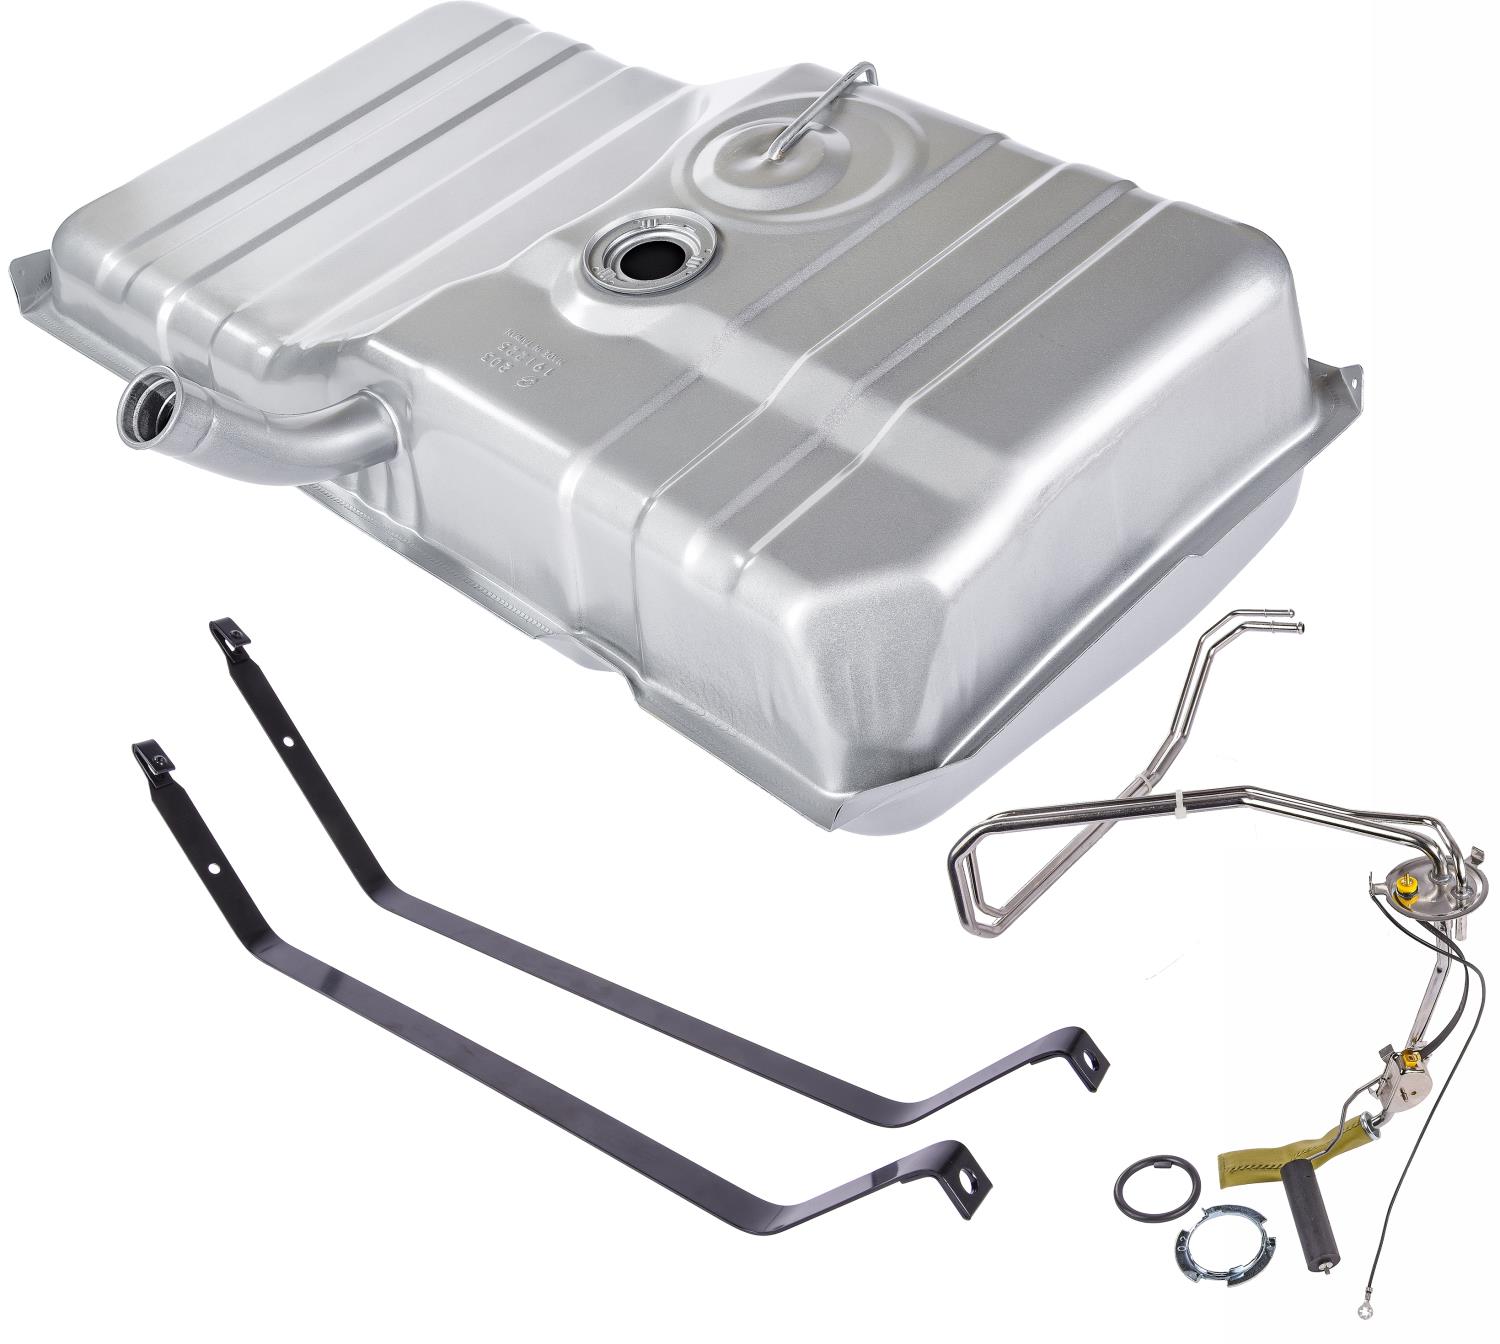 Fuel Tank Kit with Straps & Sending Unit for 1974-1978 Camaro and Firebird [21-Gallon]